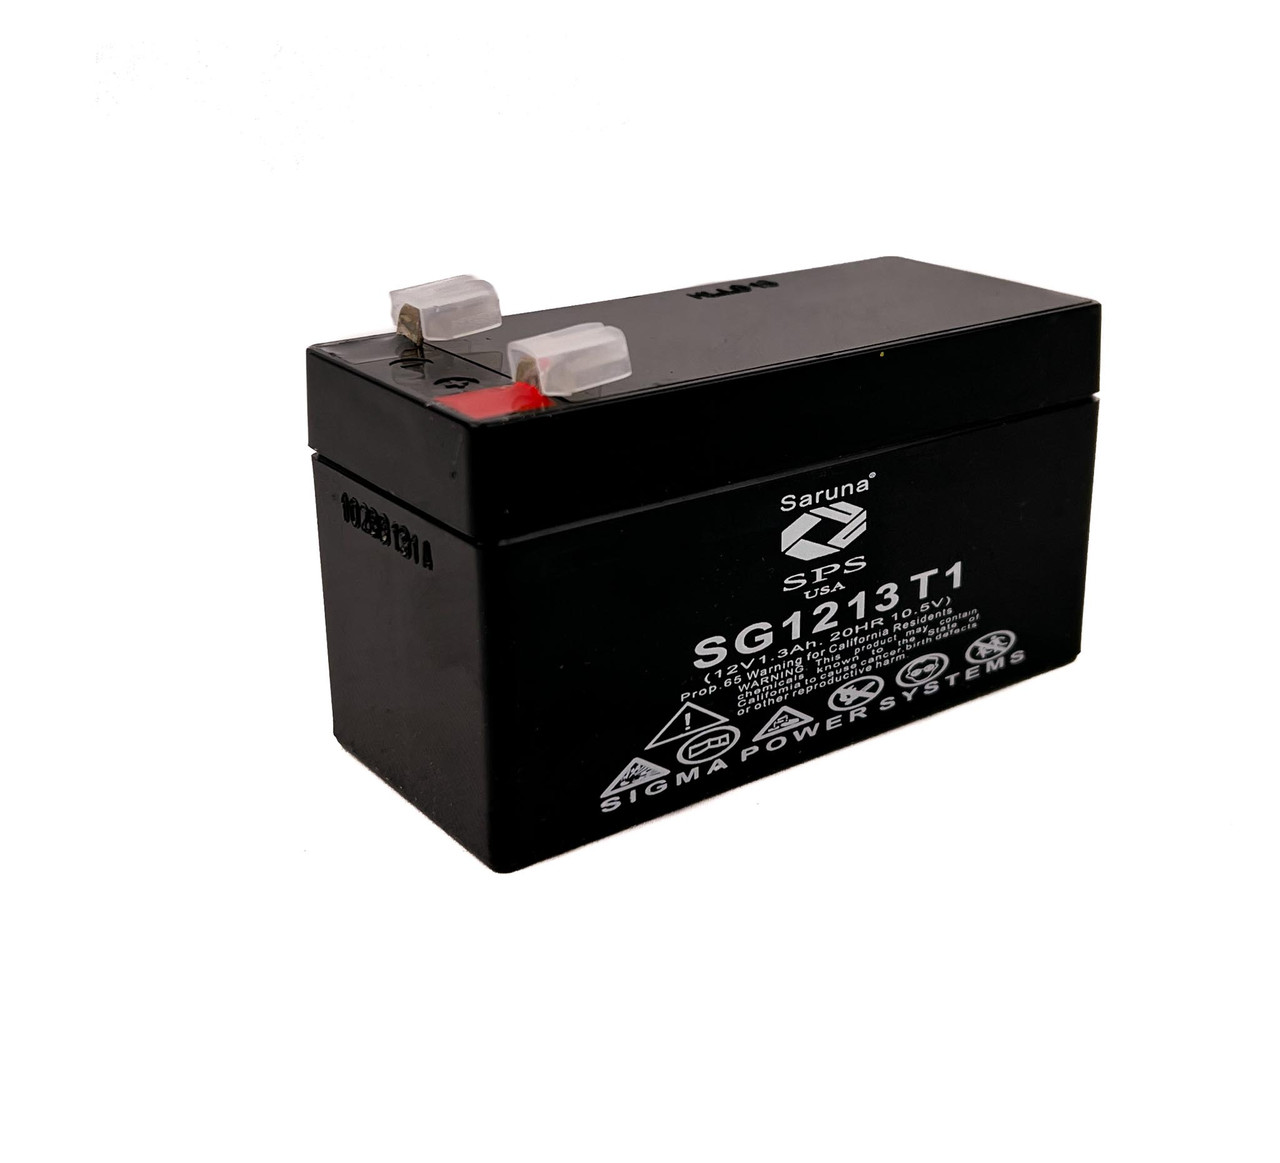 Raion Power 12V 1.3Ah Non-Spillable Replacement Rechargebale Battery for 2012 Range Rover Evoque 17C635 BJ32-19G207C-AA